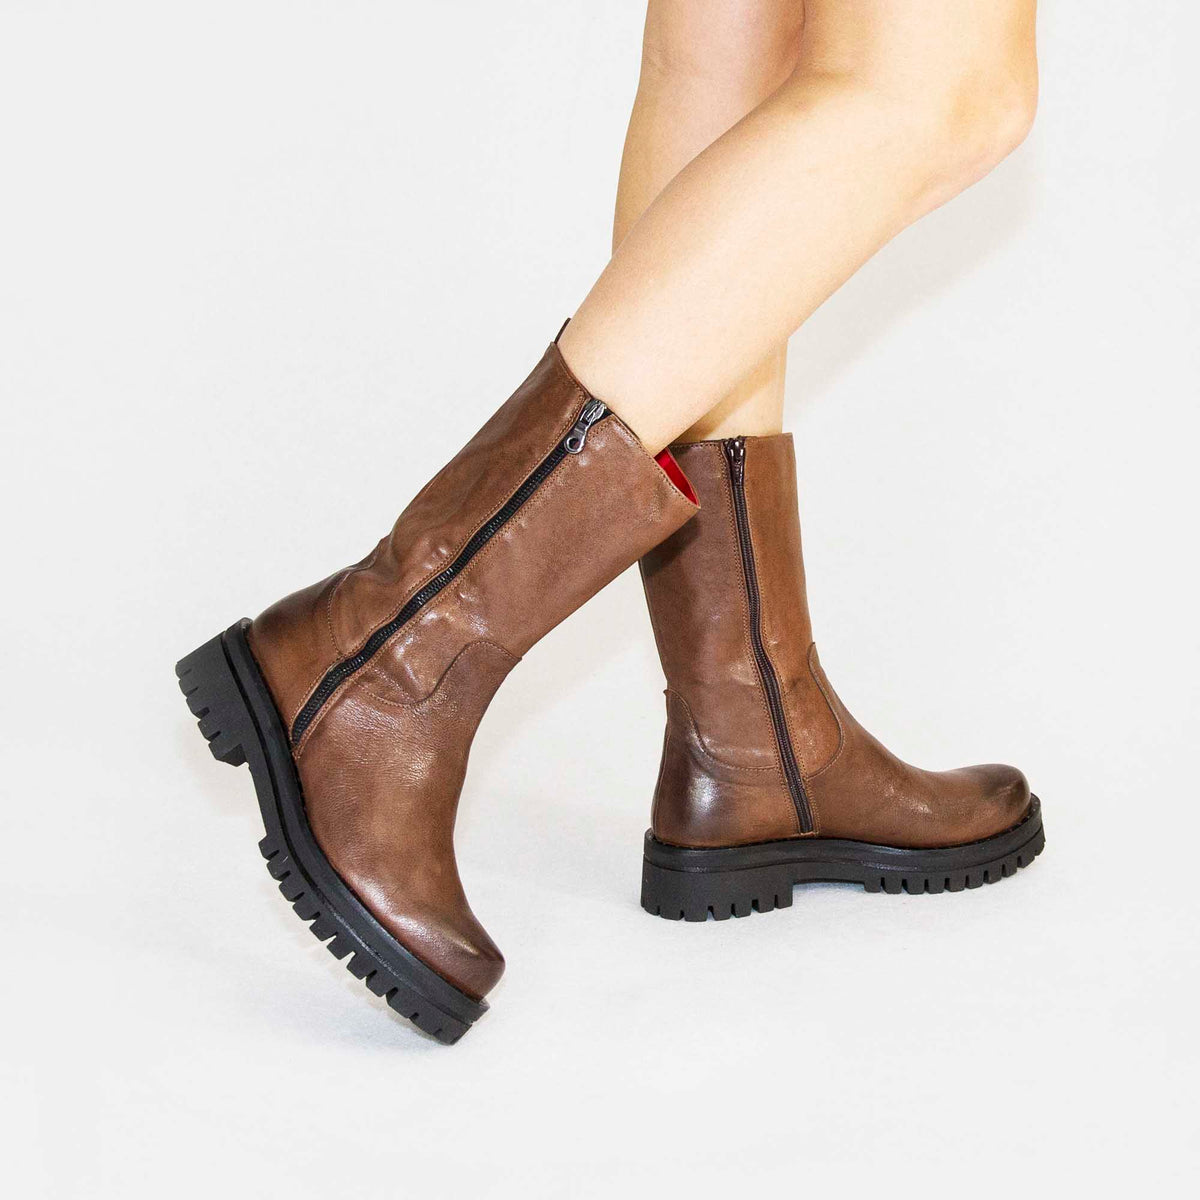 Women's handmade mid-calf ankle boots in brown calf leather and side zip